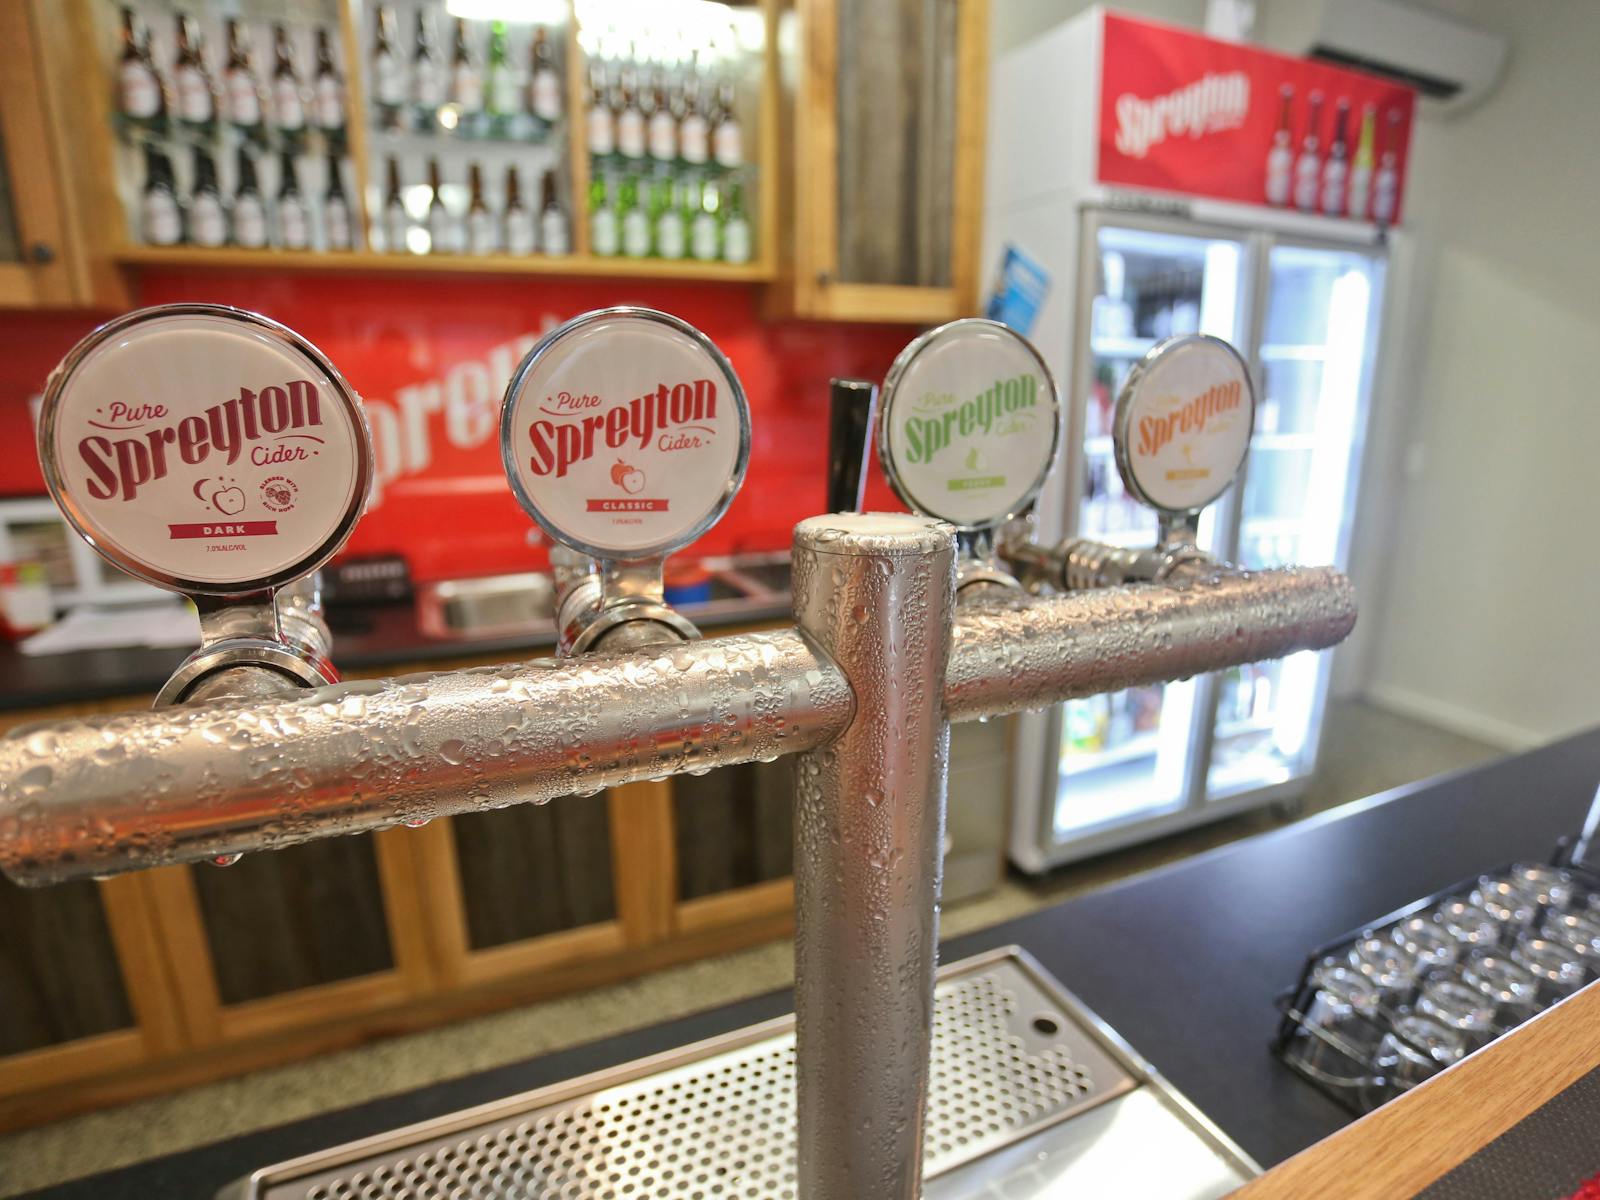 Spreyton Cider Co has wonderful cider, apple juice and more to sample